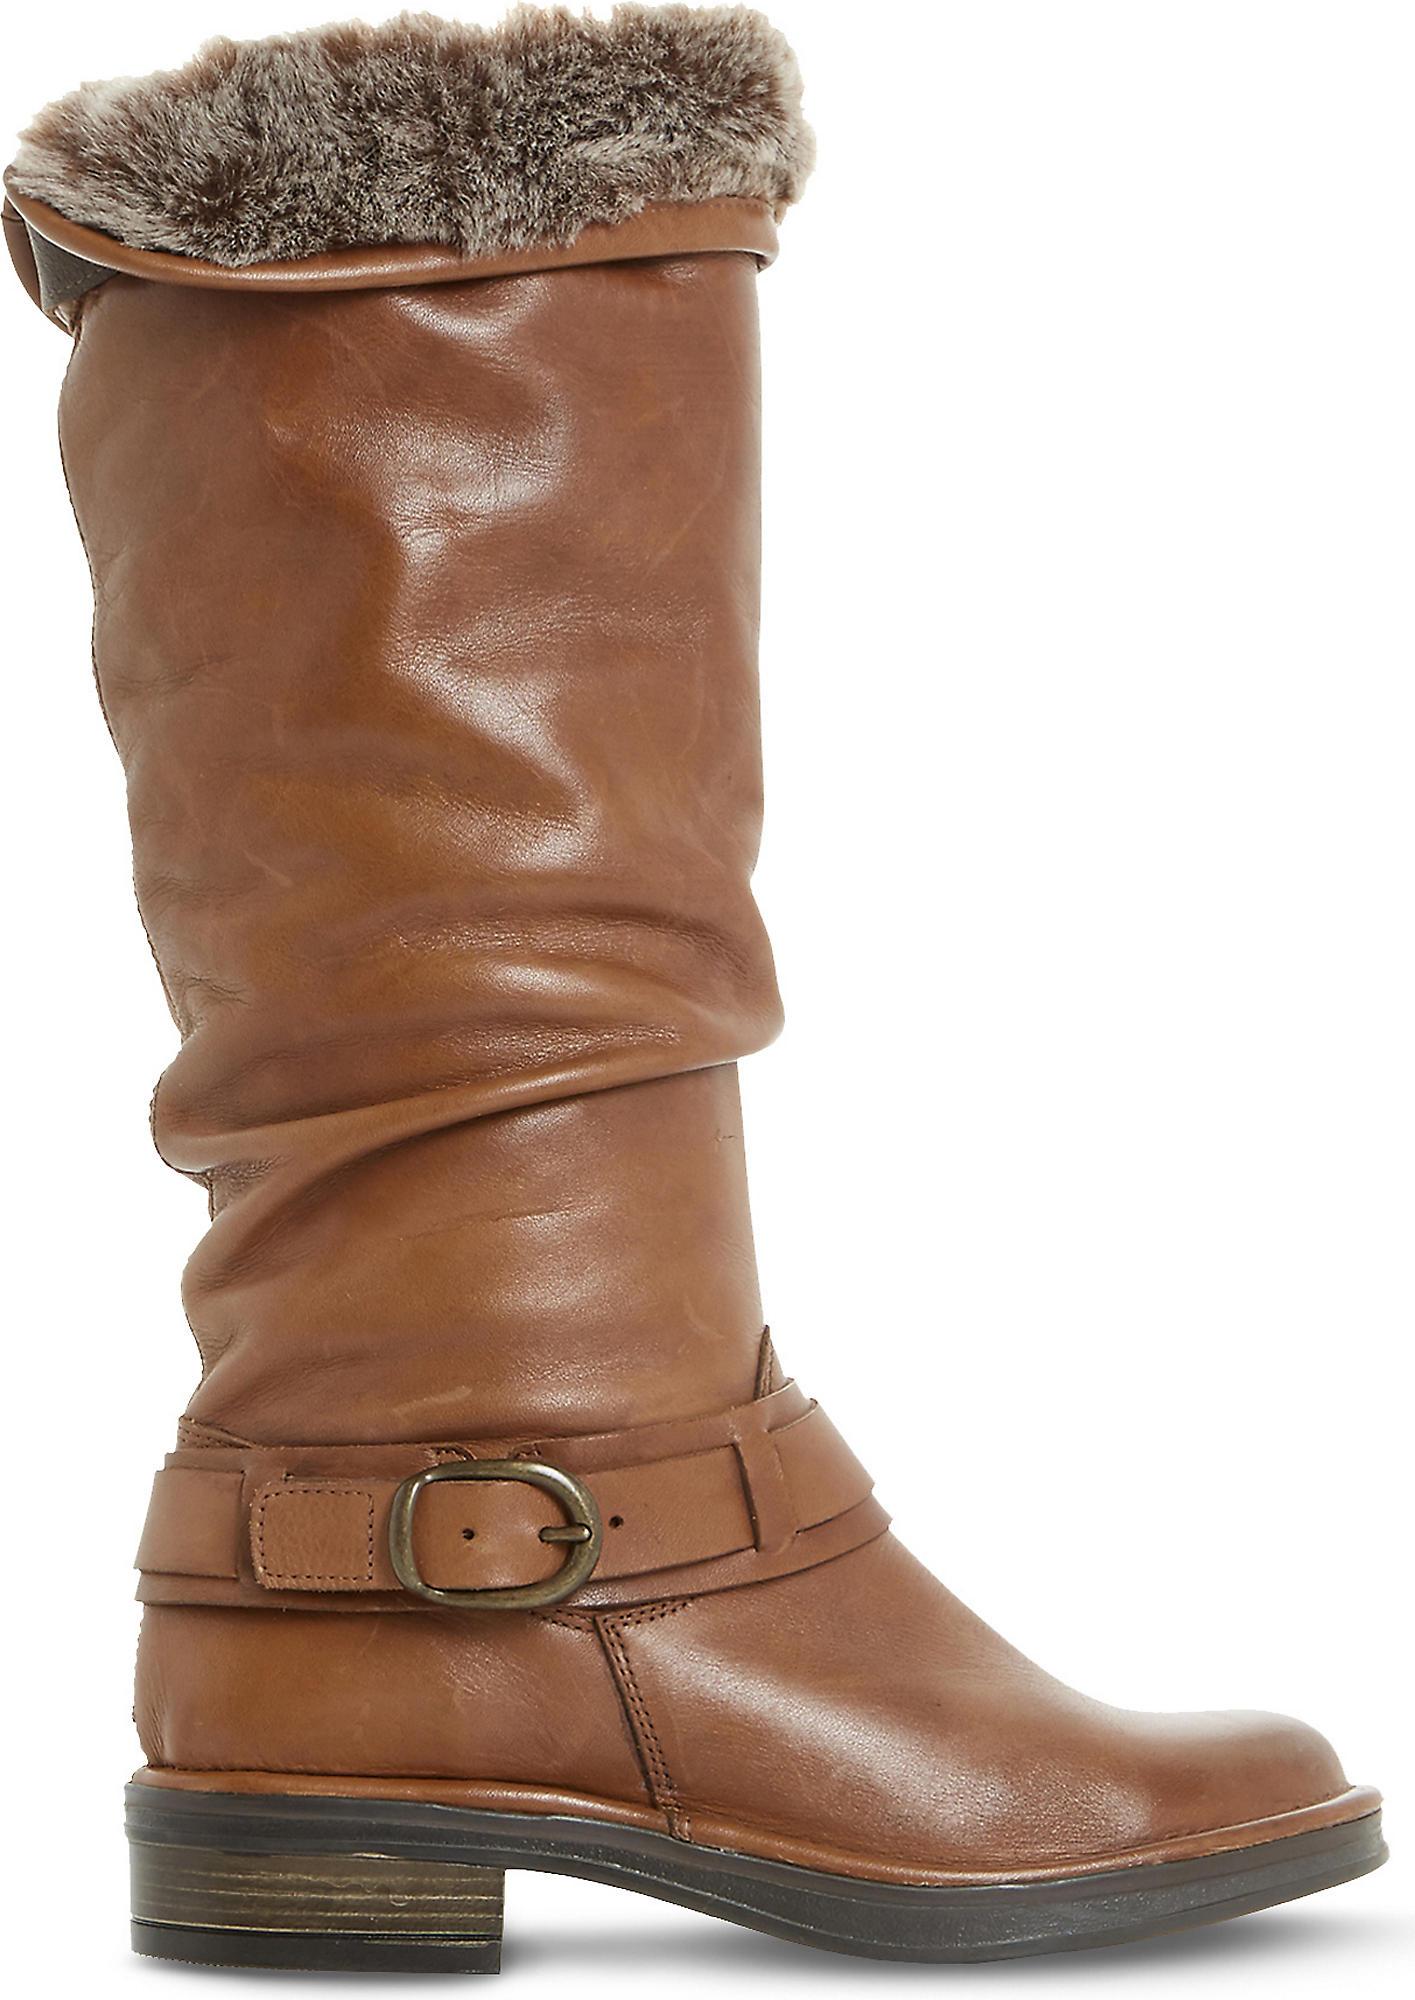 Dune Torie Ruched Leather Boots in Tan-Leather (Brown) - Lyst